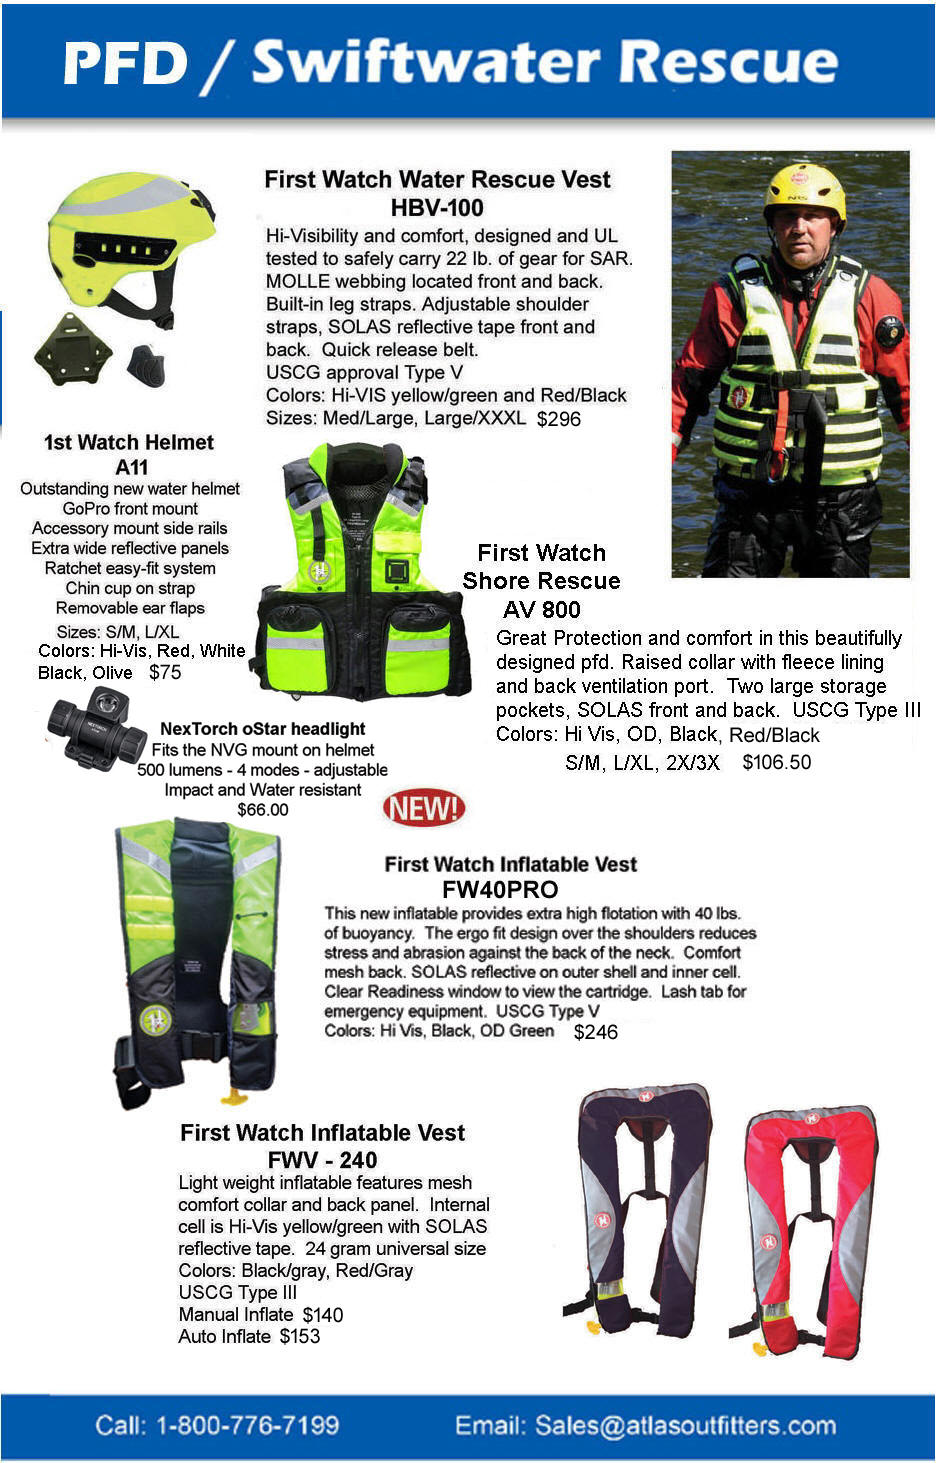 First Watch pfds and helmets